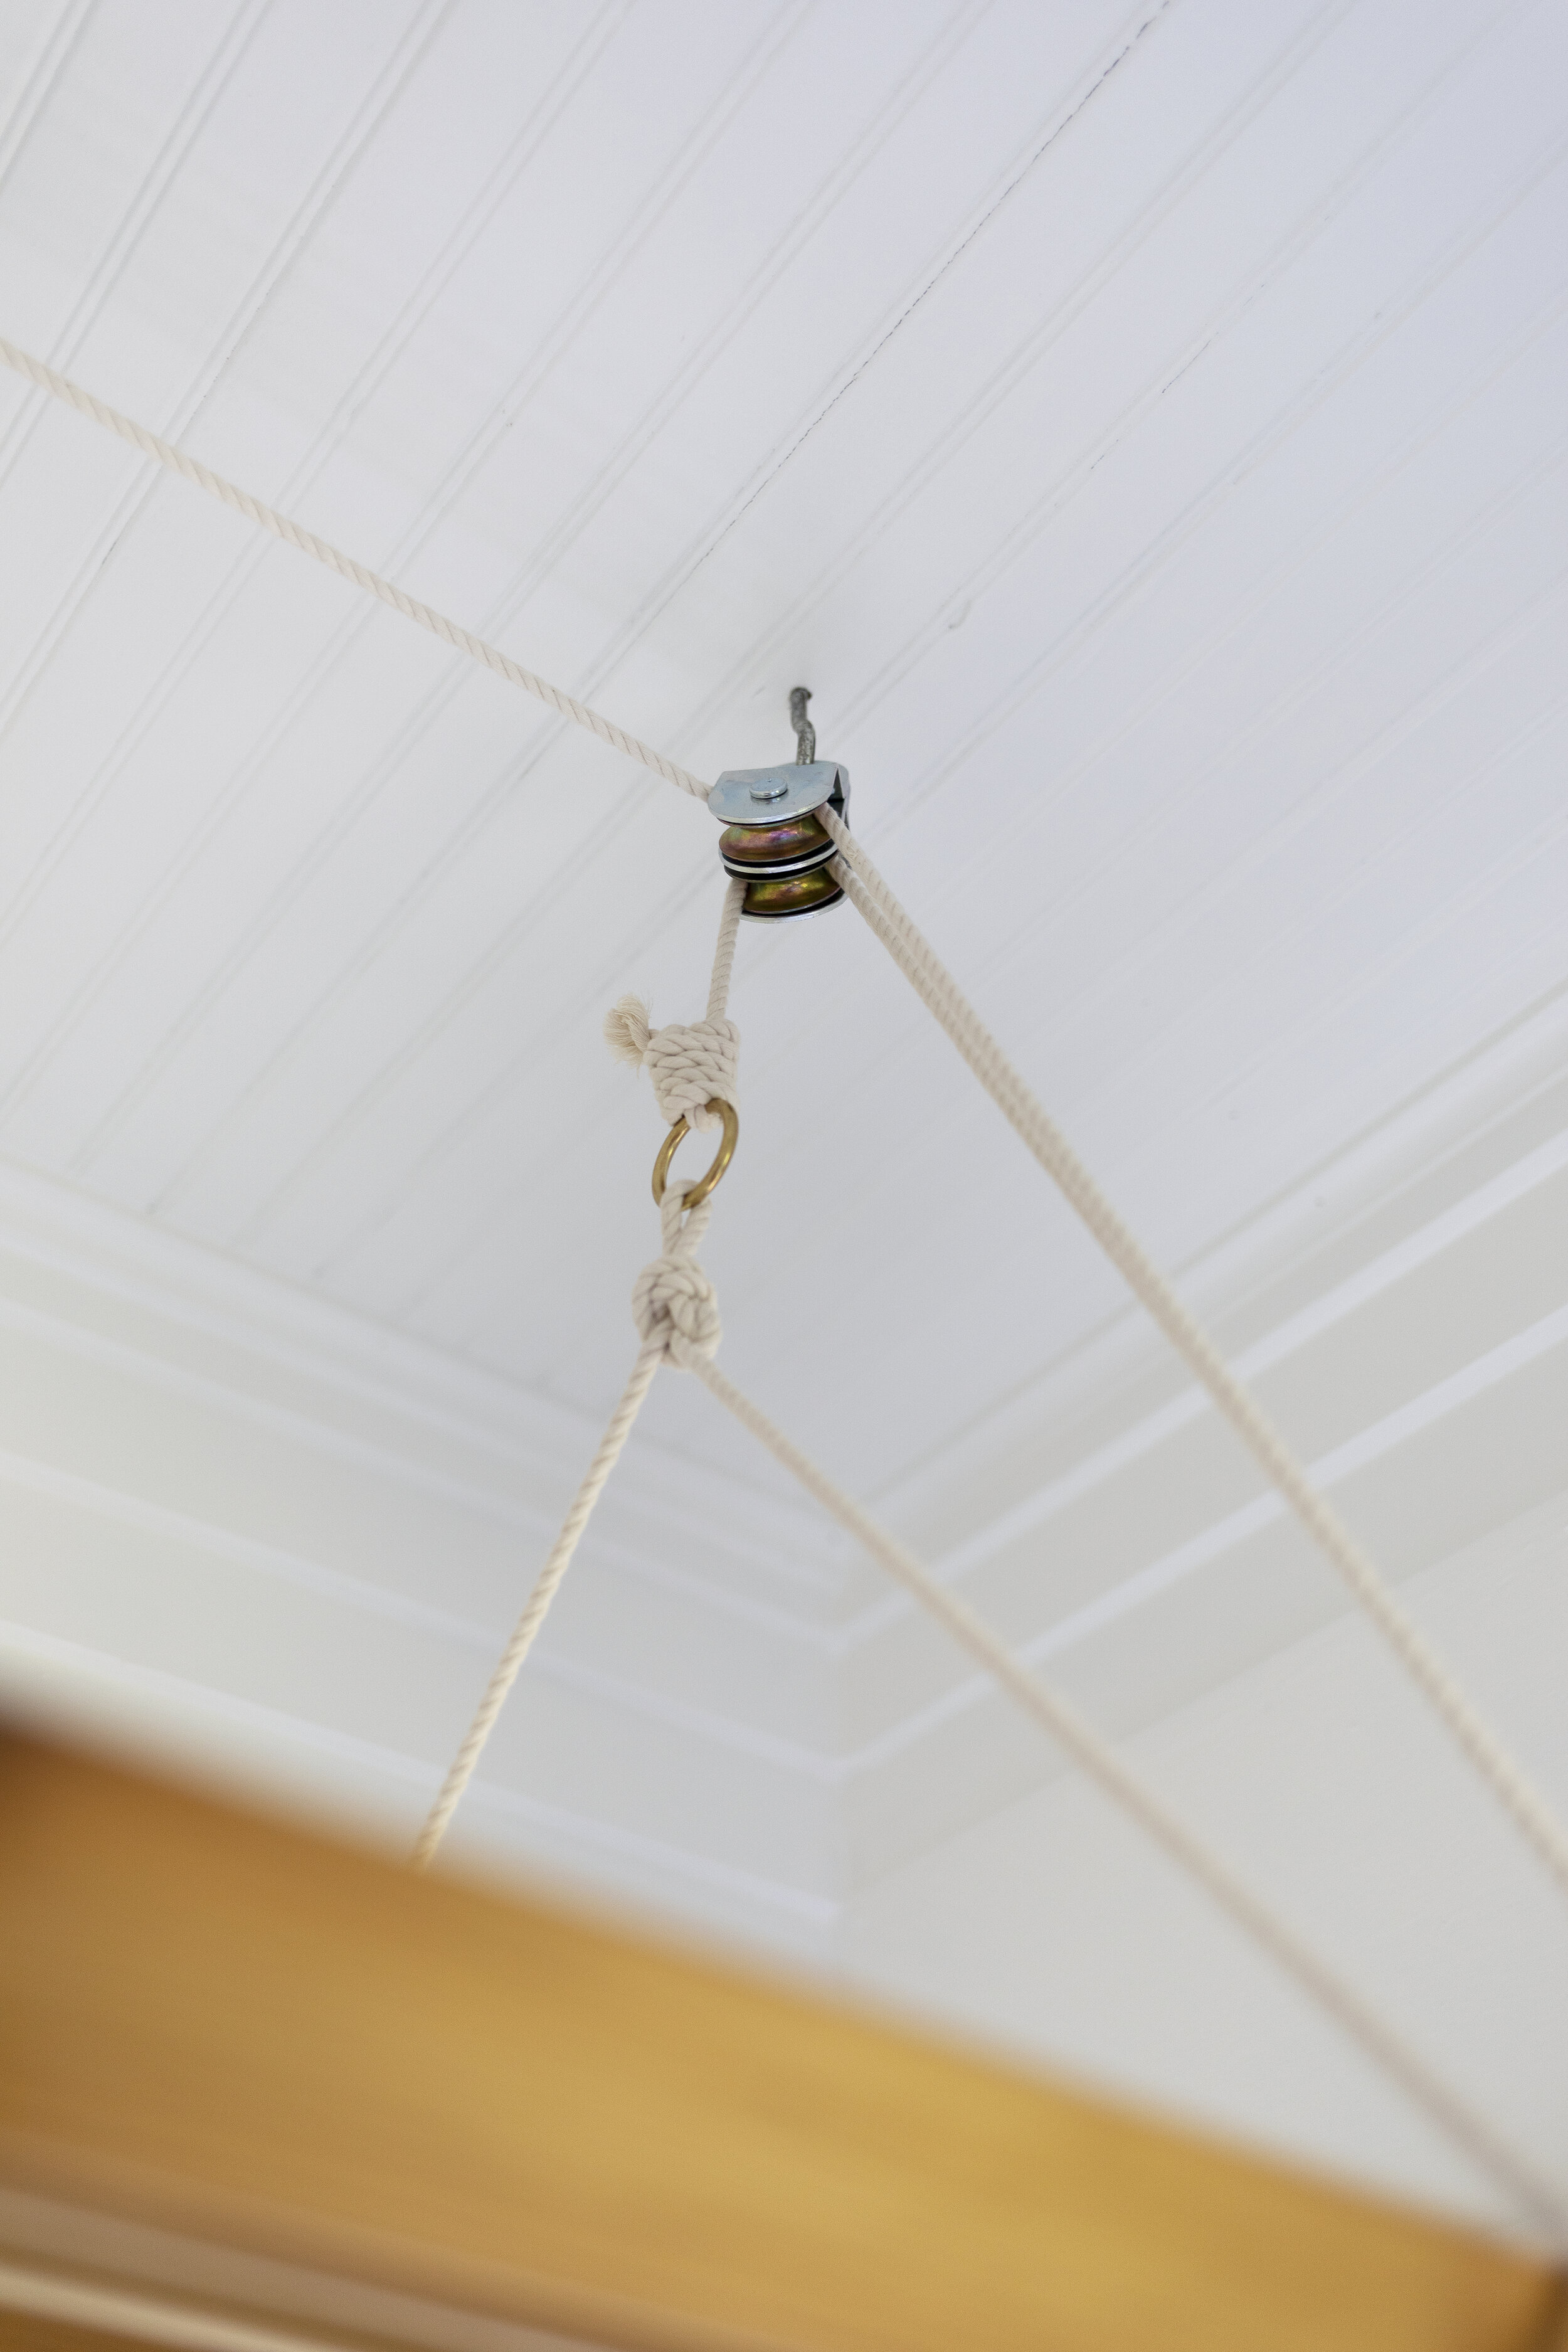 How To Build A Hanging Laundry Rack